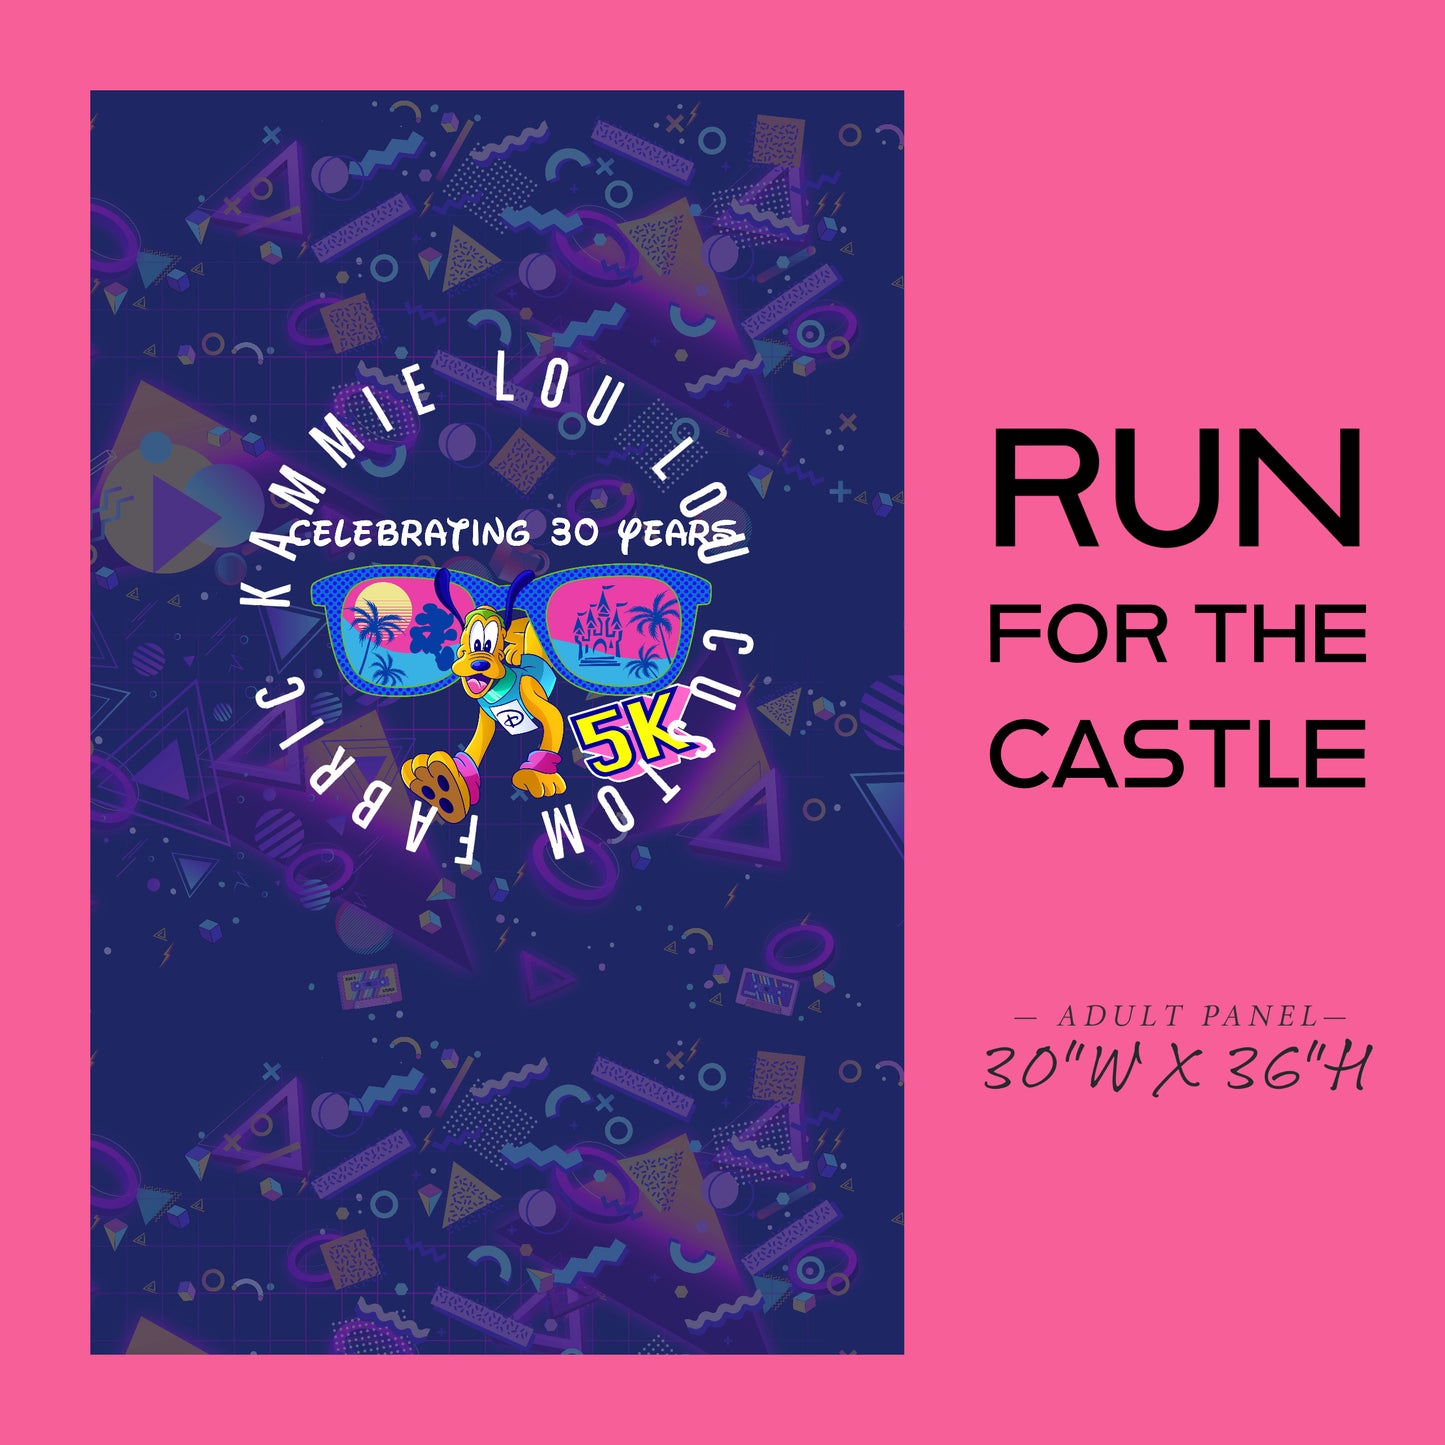 Special Pre-order Run for the Castle - Marathon - Cheers to 30 years - Panel - ADULT - 5K